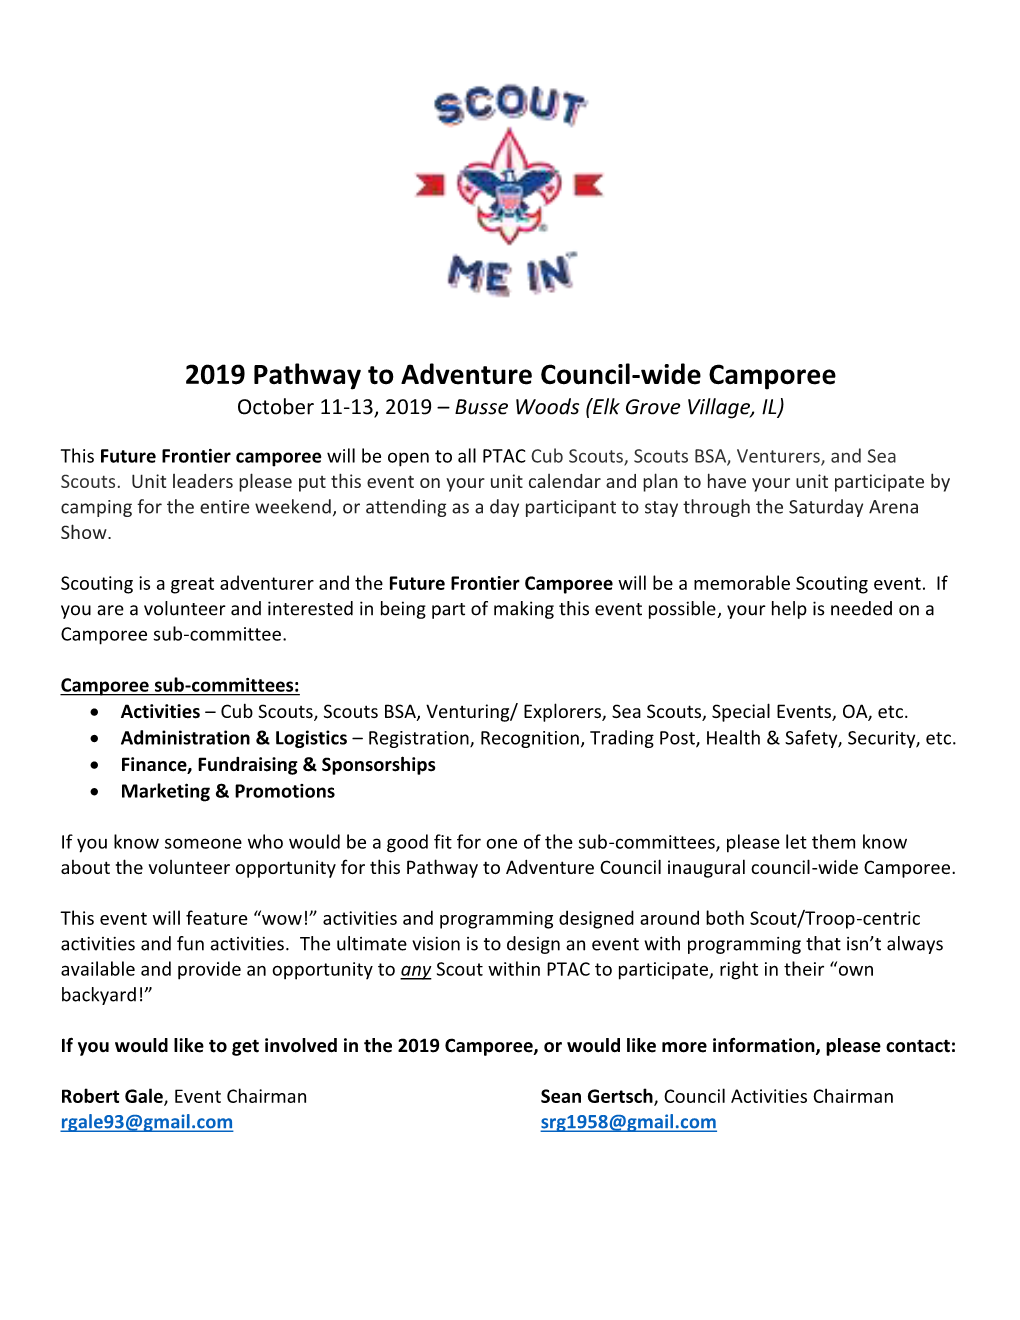 2019 Pathway to Adventure Council-Wide Camporee October 11-13, 2019 – Busse Woods (Elk Grove Village, IL)